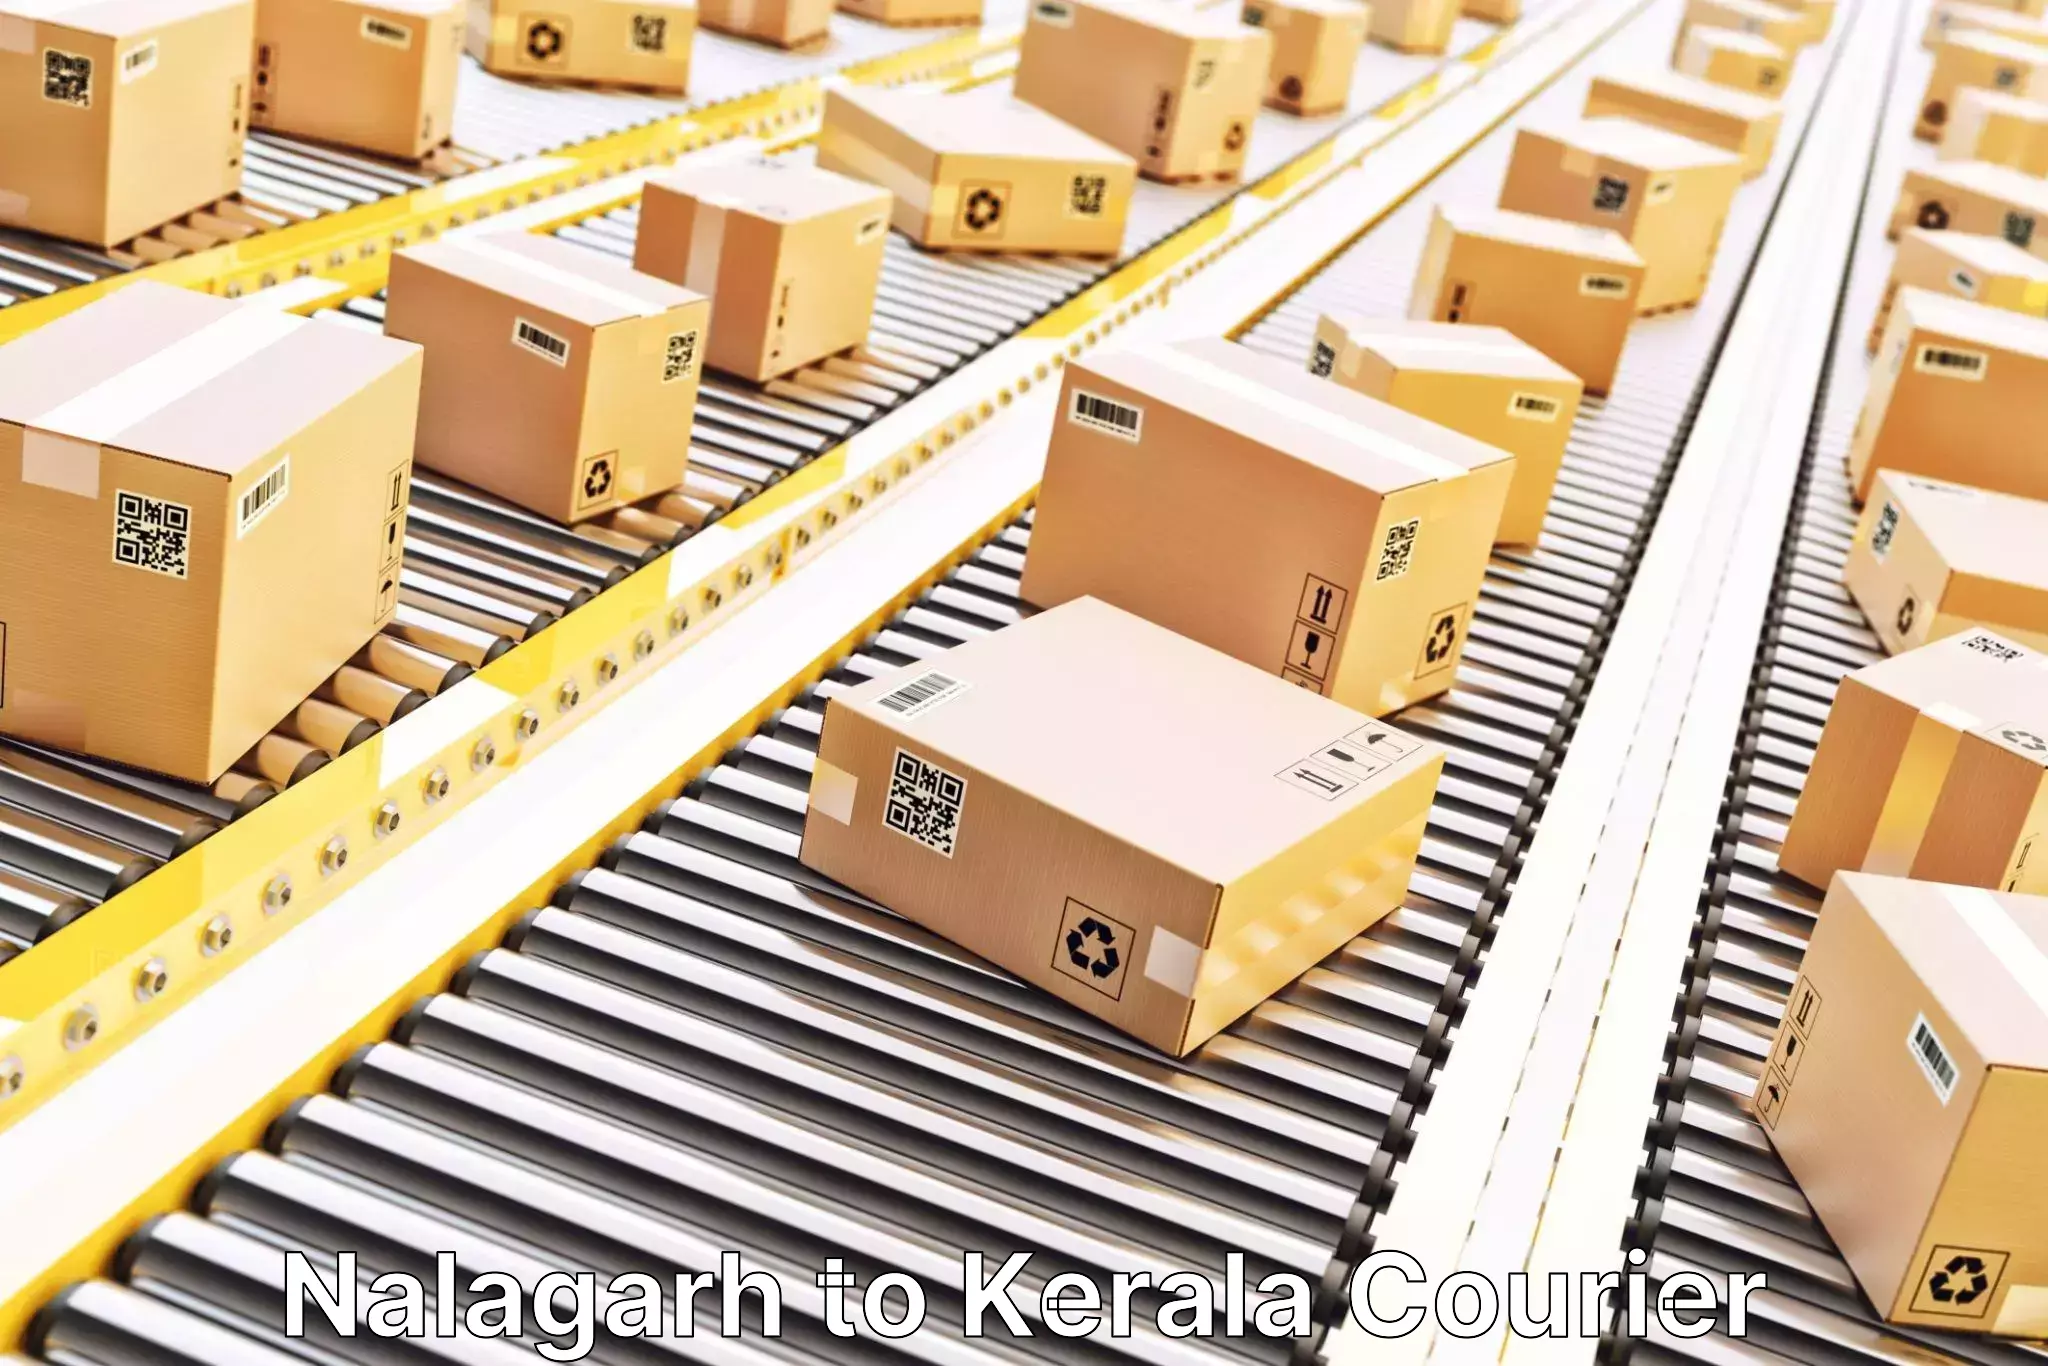 Same-day delivery solutions Nalagarh to Kuttikol